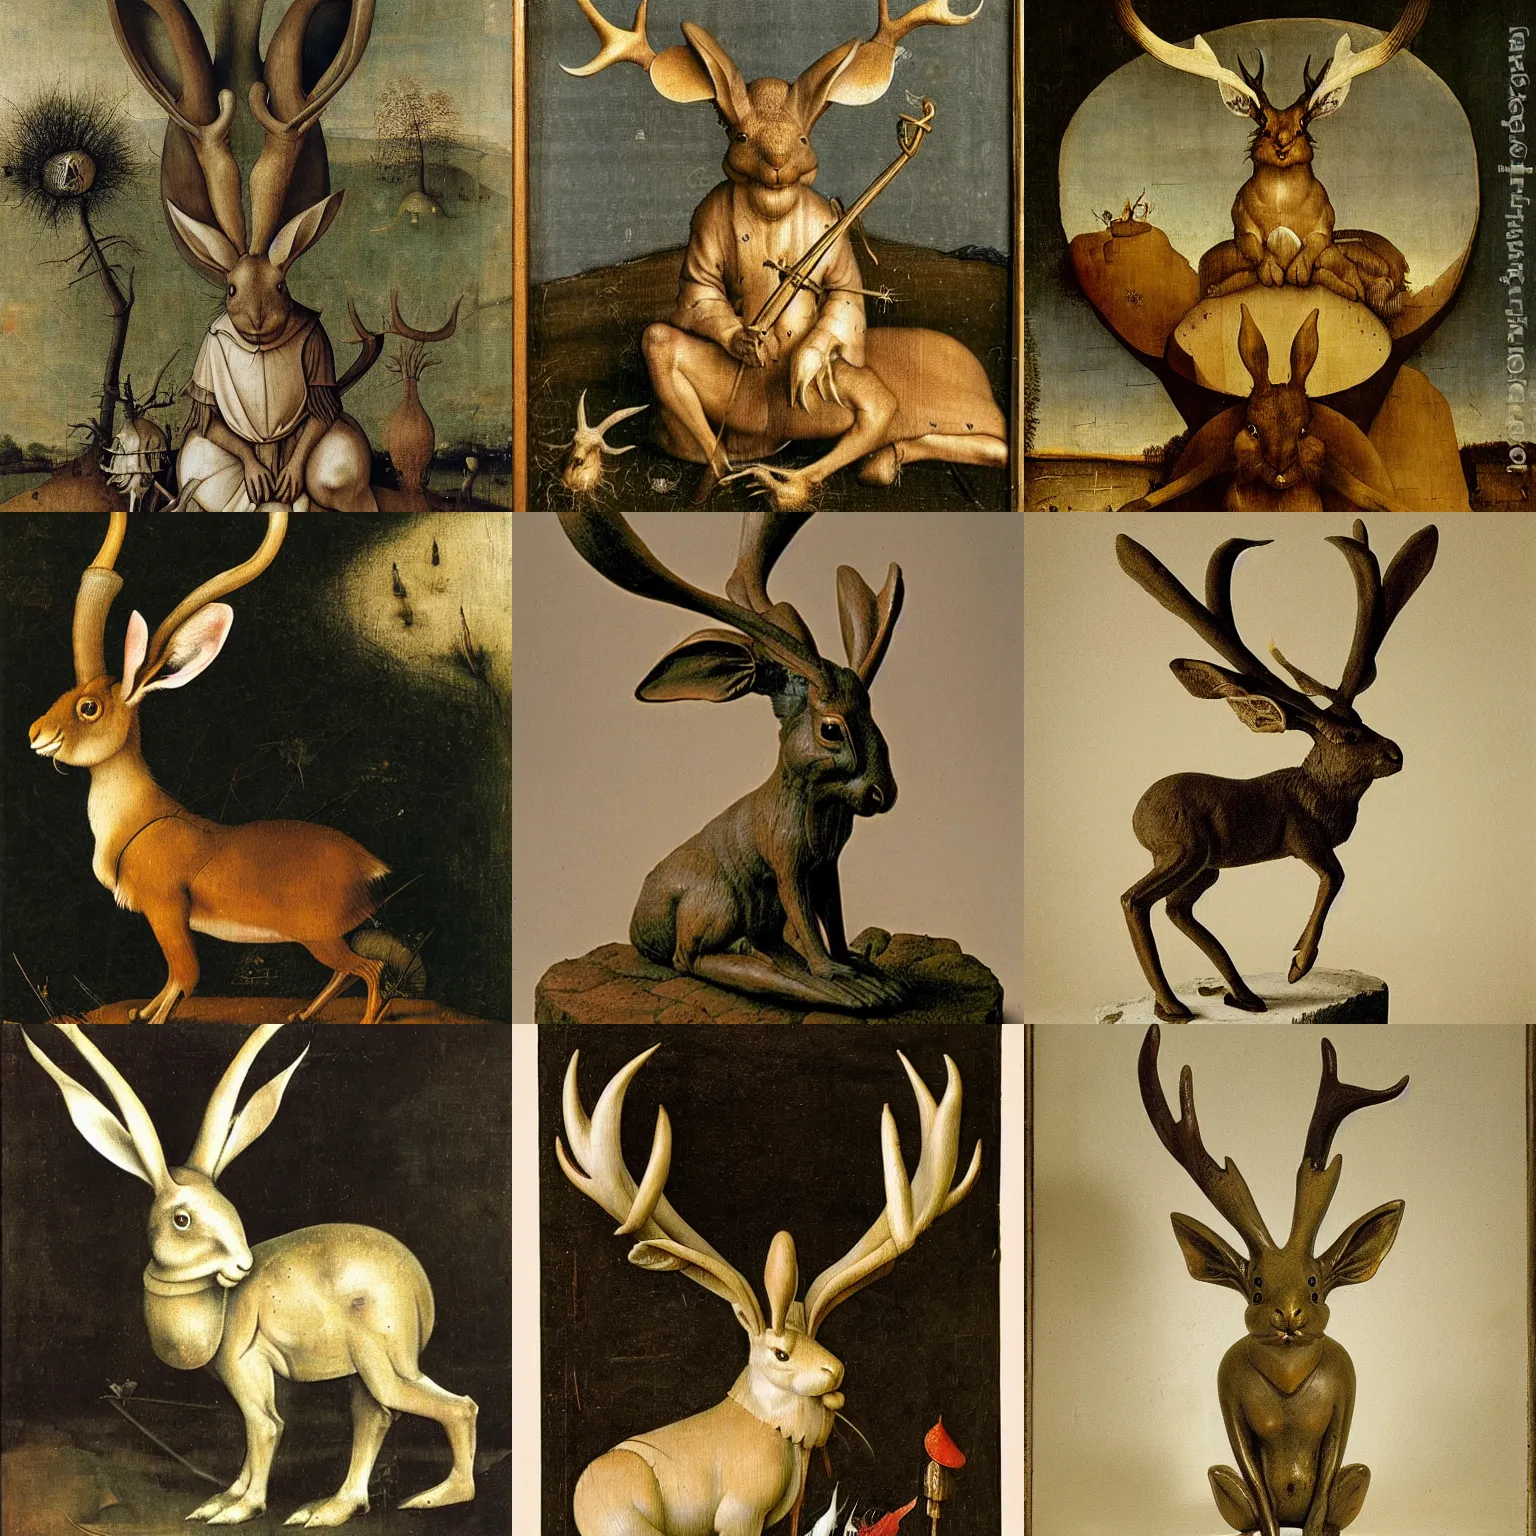 Prompt: a jackalope statue by Hieronymus Bosch